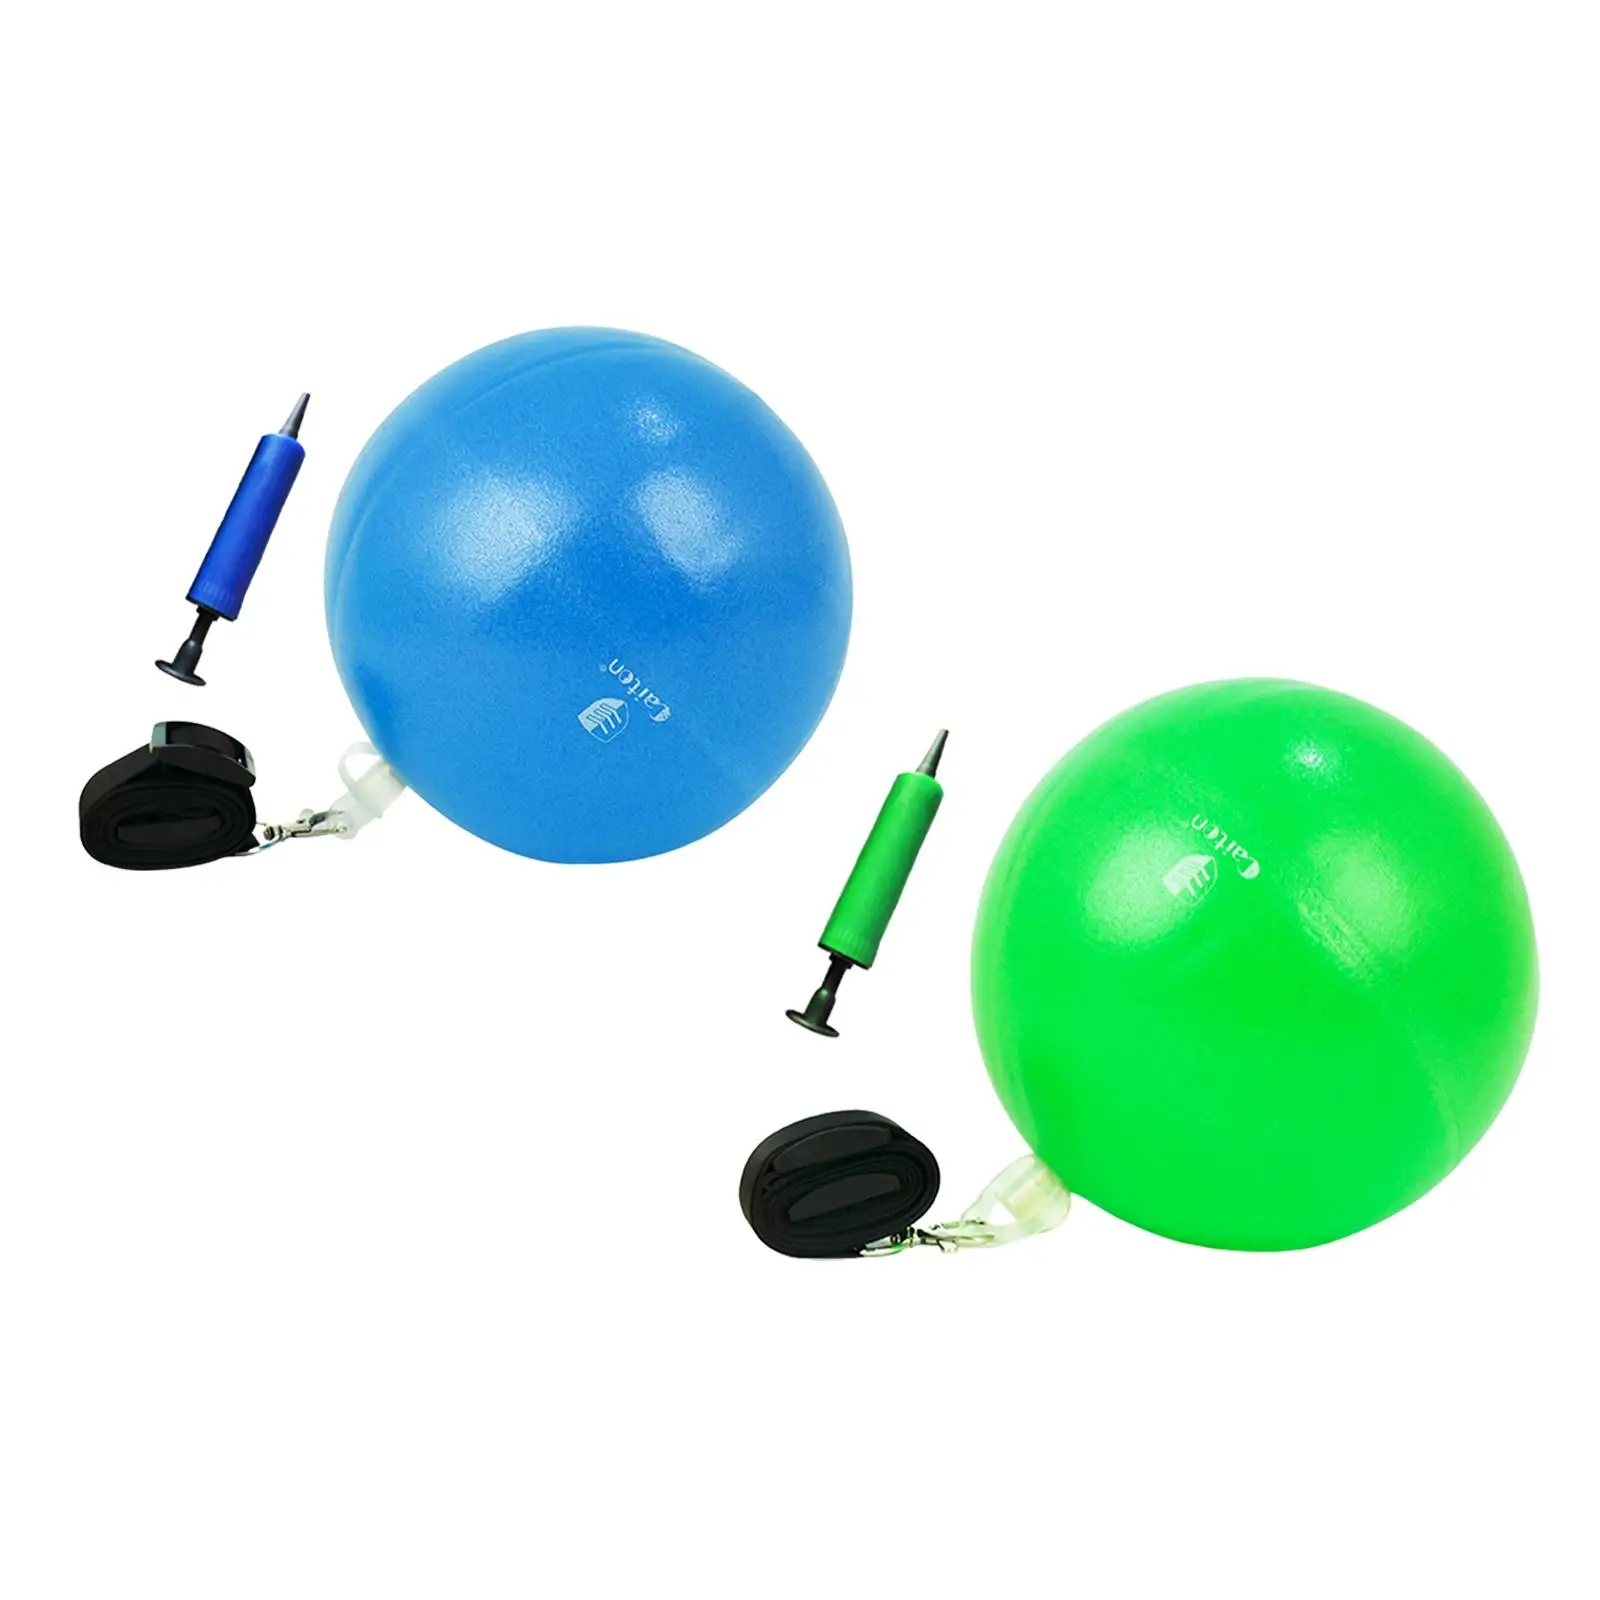 Professional ball Golf Swing Training Aid Motion Correction W/ Adjustable Lanyard Assist for Posture Correction Practing